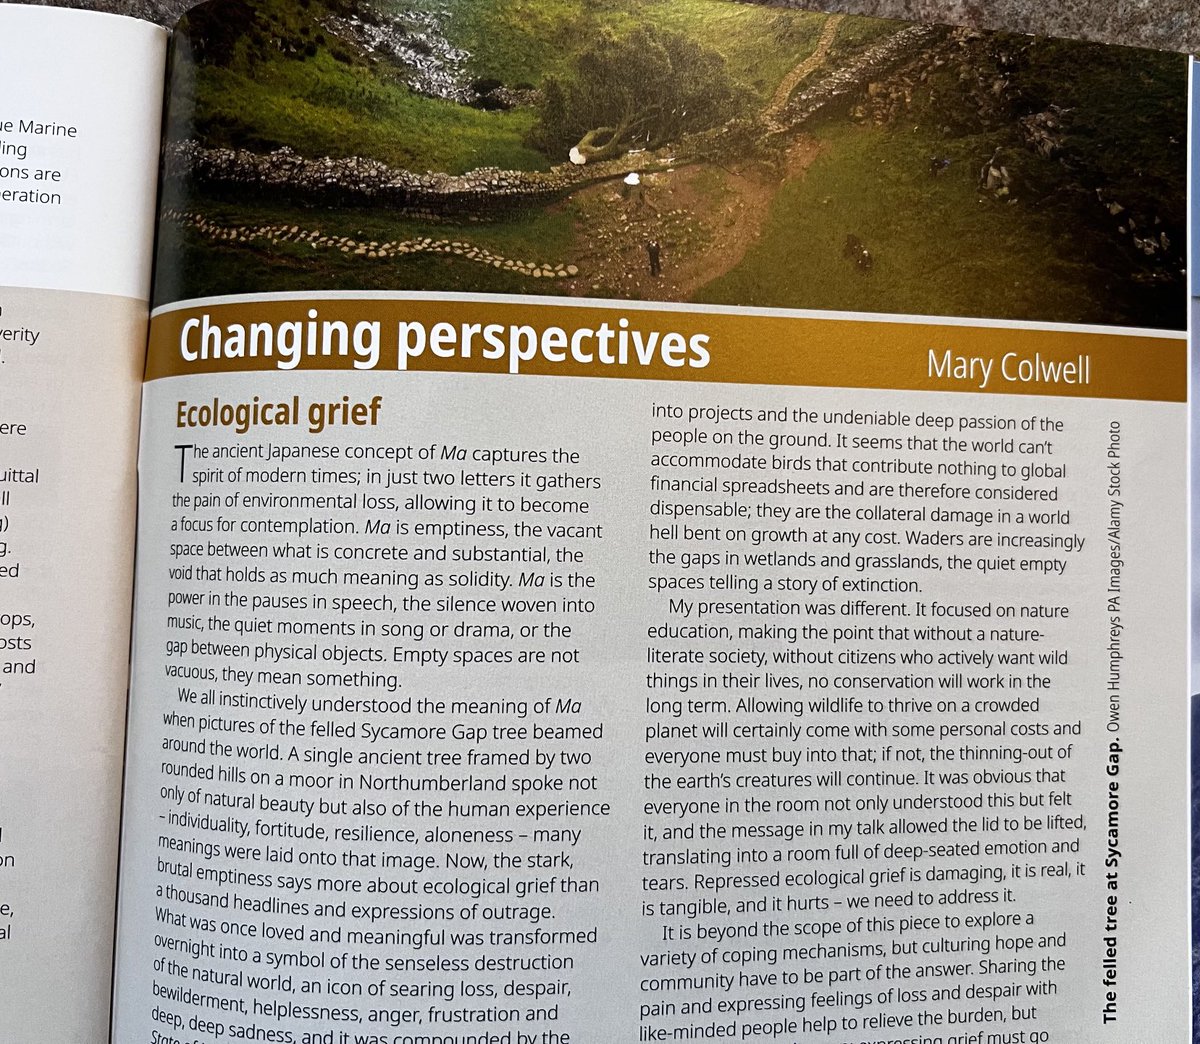 My article in the Nov/Dec edition of British Wildlife on ecological grief. We must talk about it. Working with constant loss, “is damaging, it is real, it is tangible and it hurts.” ⁦@britwildlife⁩ ⁦@CurlewAction⁩